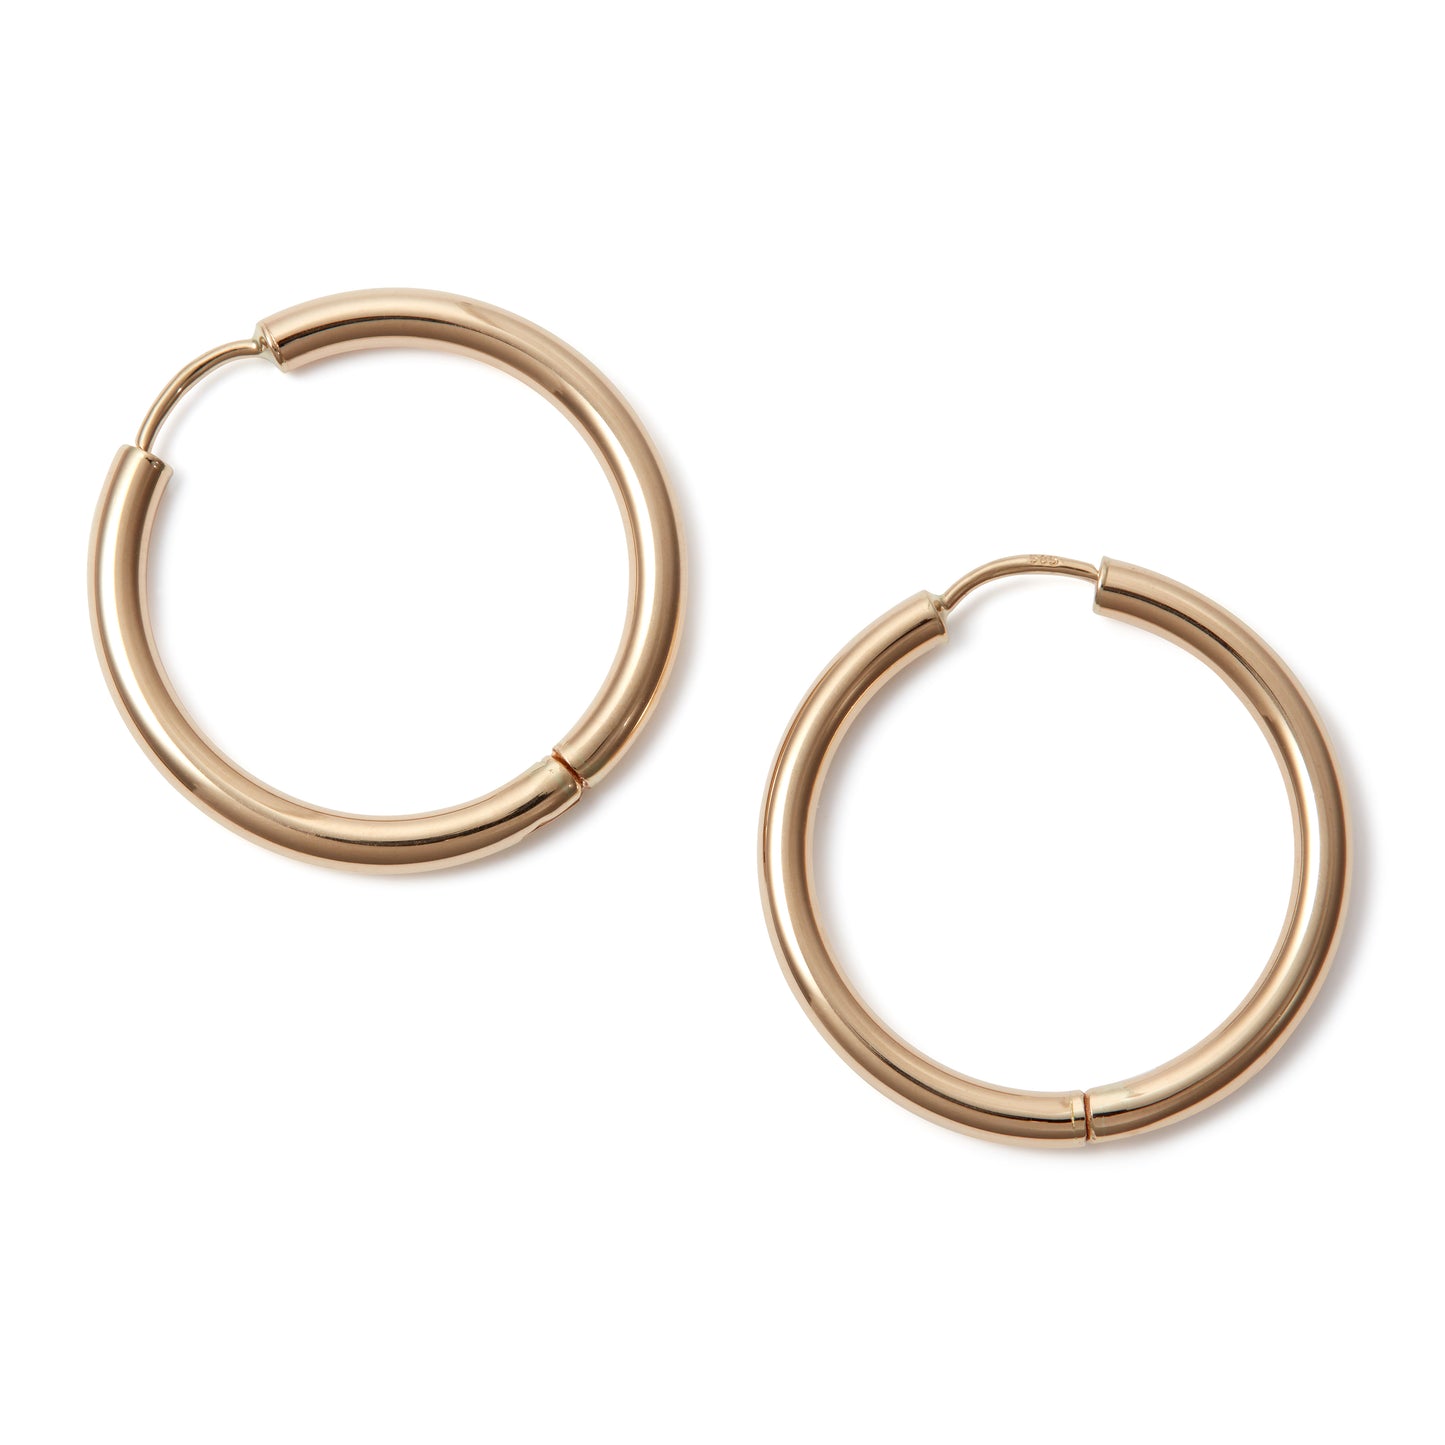 large hoop earrings, polished gold hoops, polished earrings, classic gold hoops, real gold hoops, solid gold hoops, solid gold earrings, gold earrings women, yellow rose white, gold polished hoops, 14k gold earrings, medium hoop earrings, solid gold huggies, 